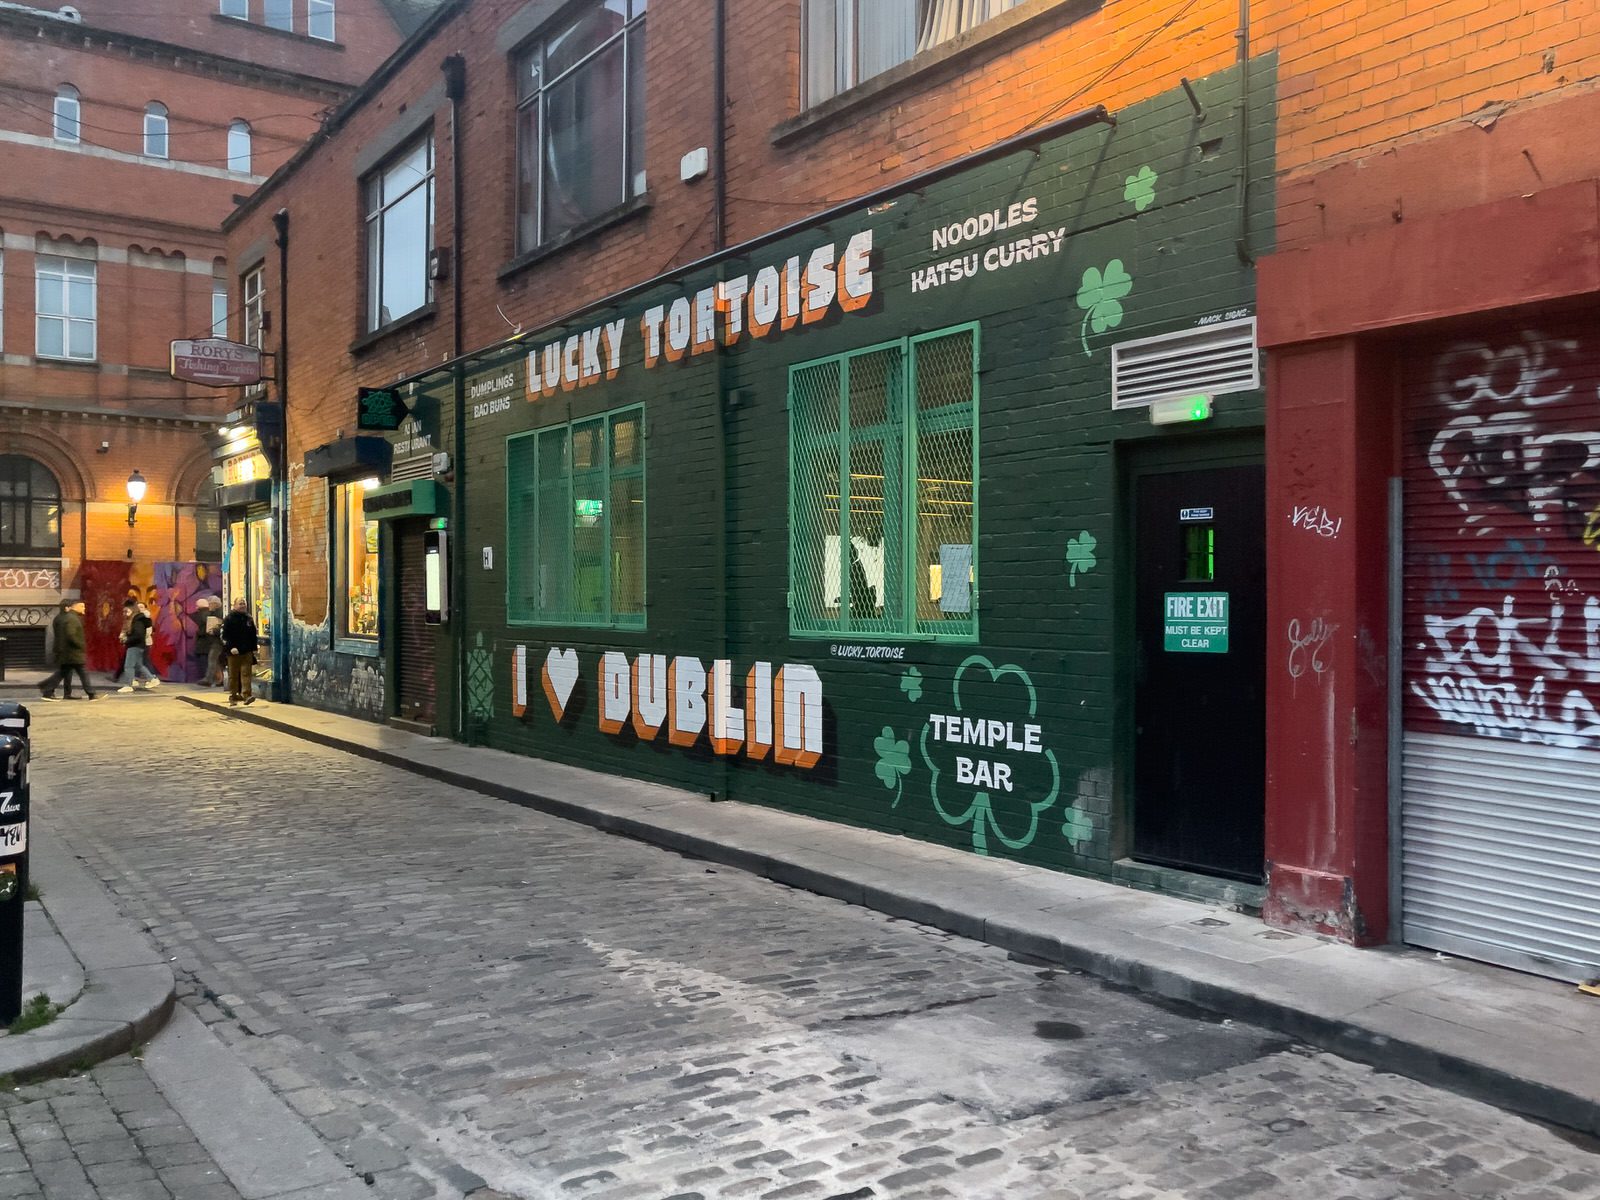 I VISITED TEMPLE BAR TODAY [AS NIGHTFALL WAS APPROACHING]-225336-1